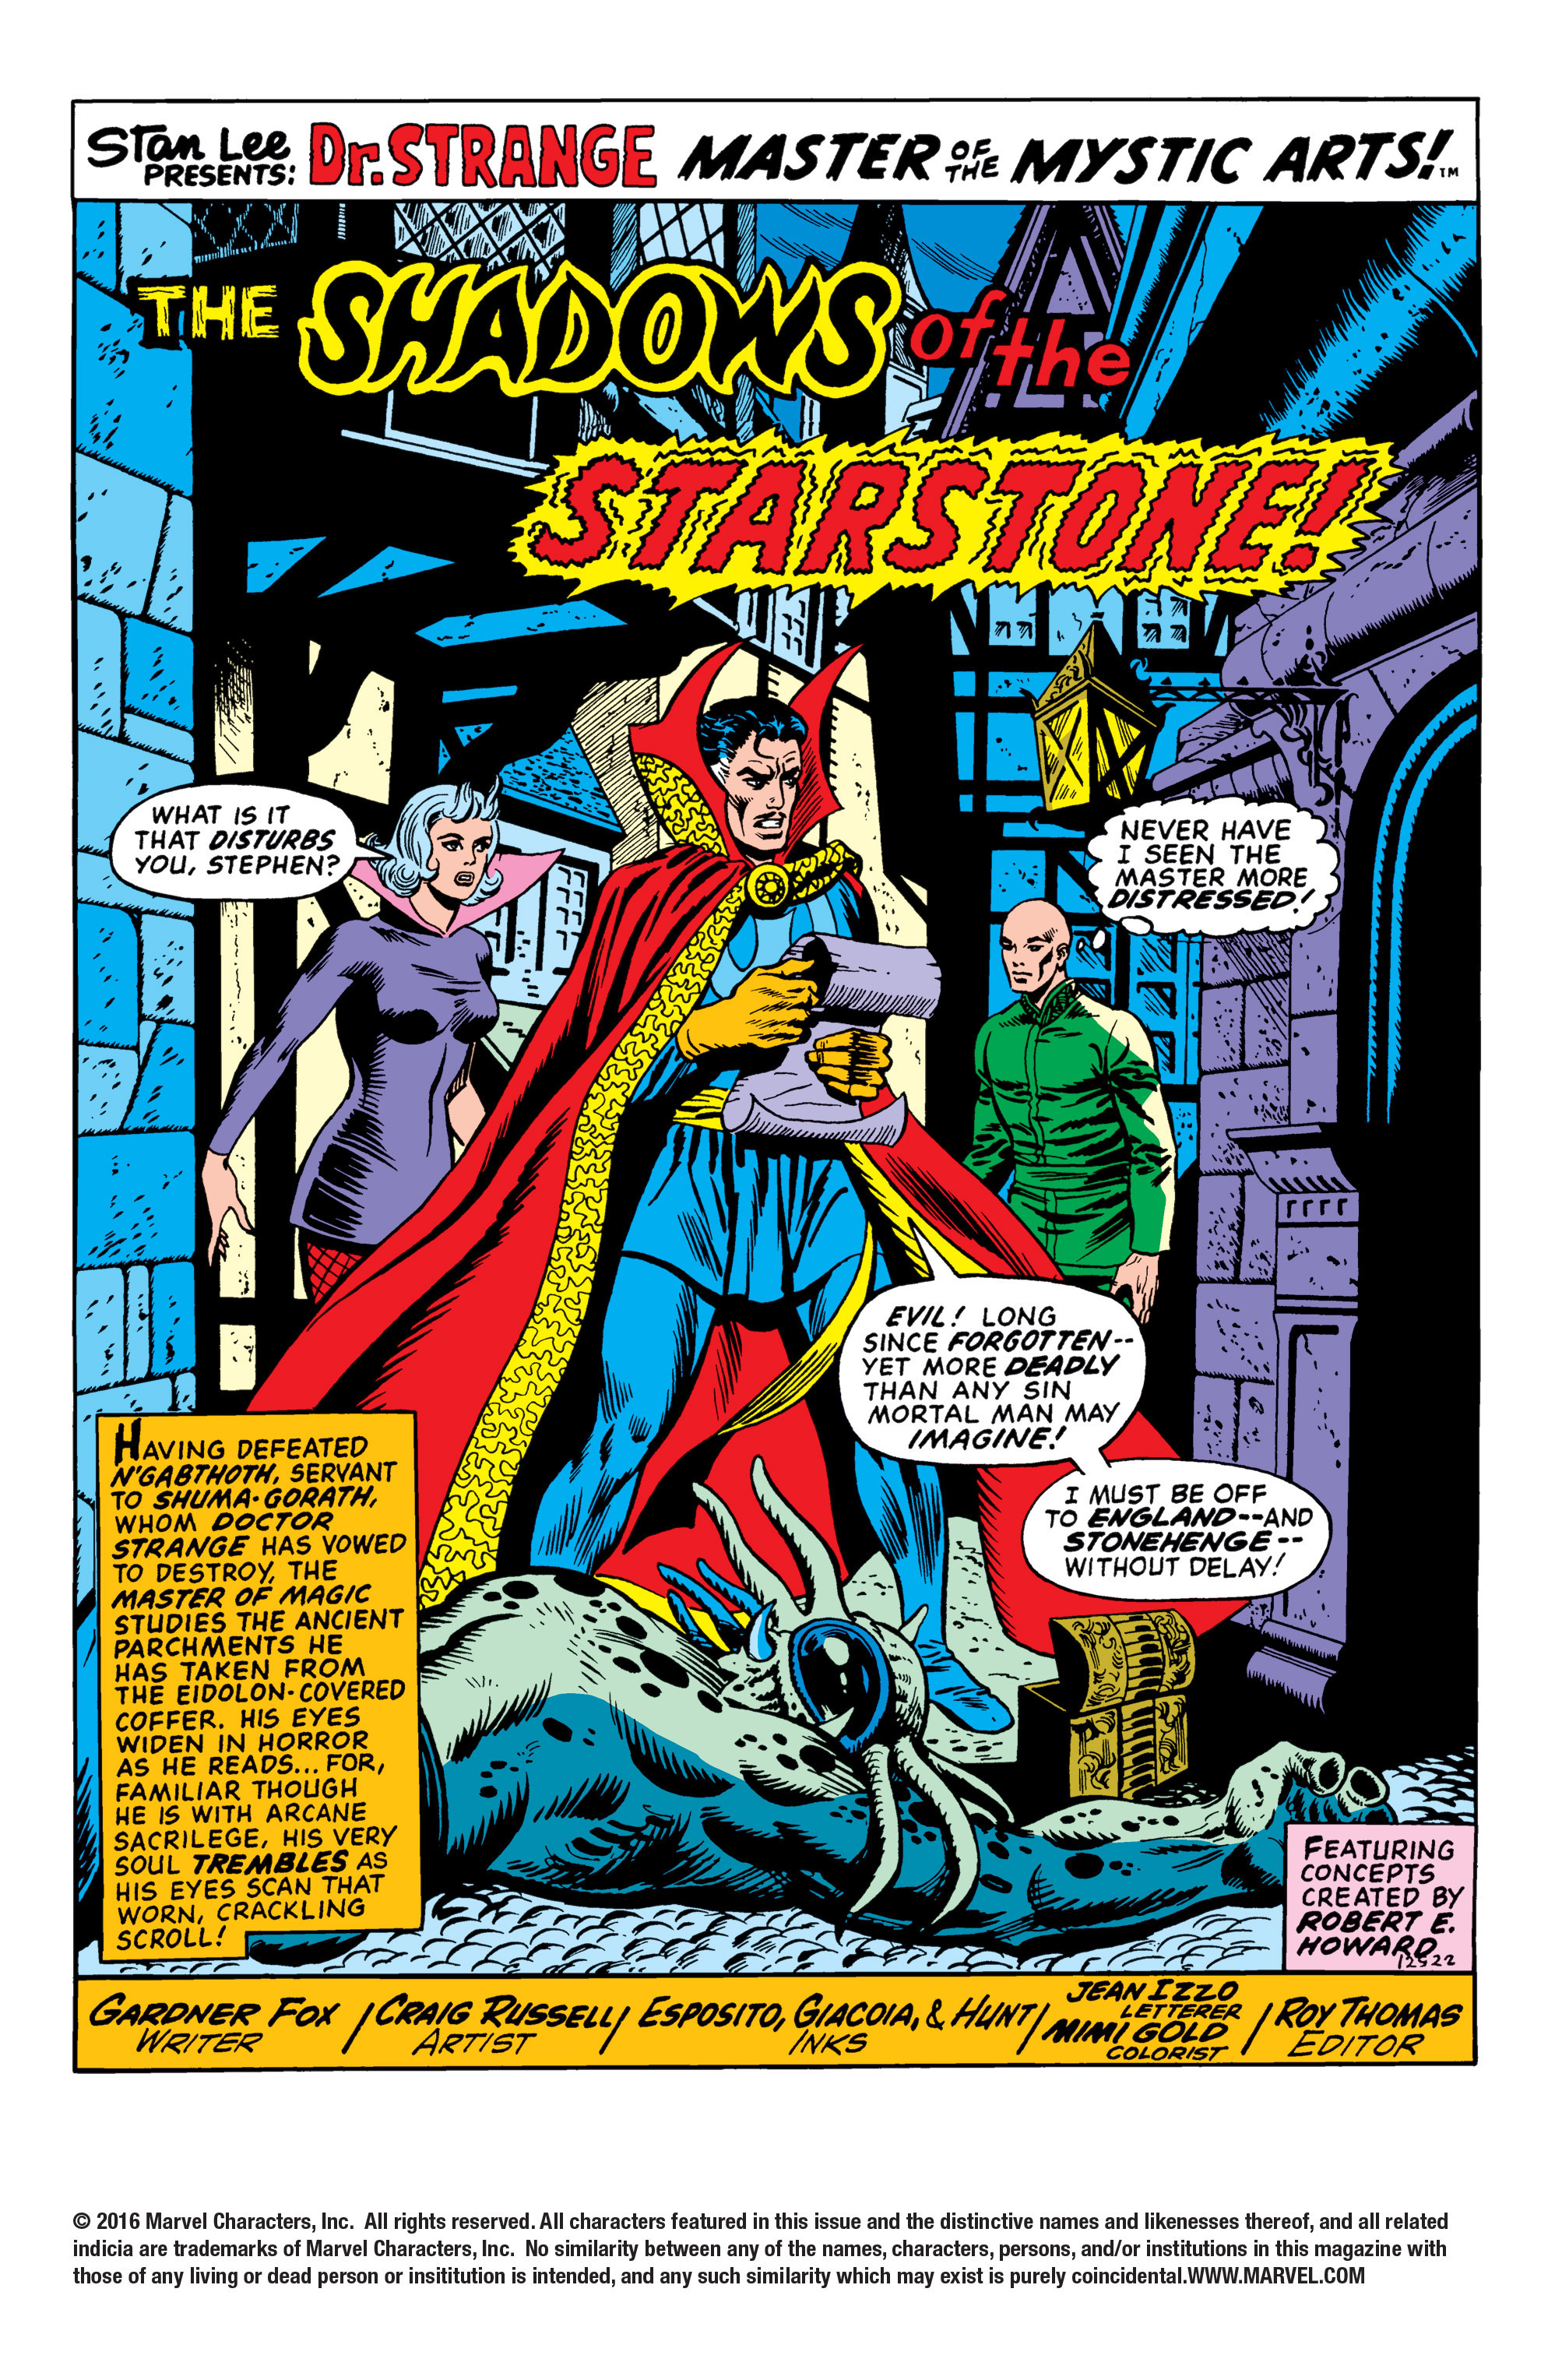 Read online Doctor Strange: What Is It That Disturbs You, Stephen? comic -  Issue # TPB (Part 1) - 93